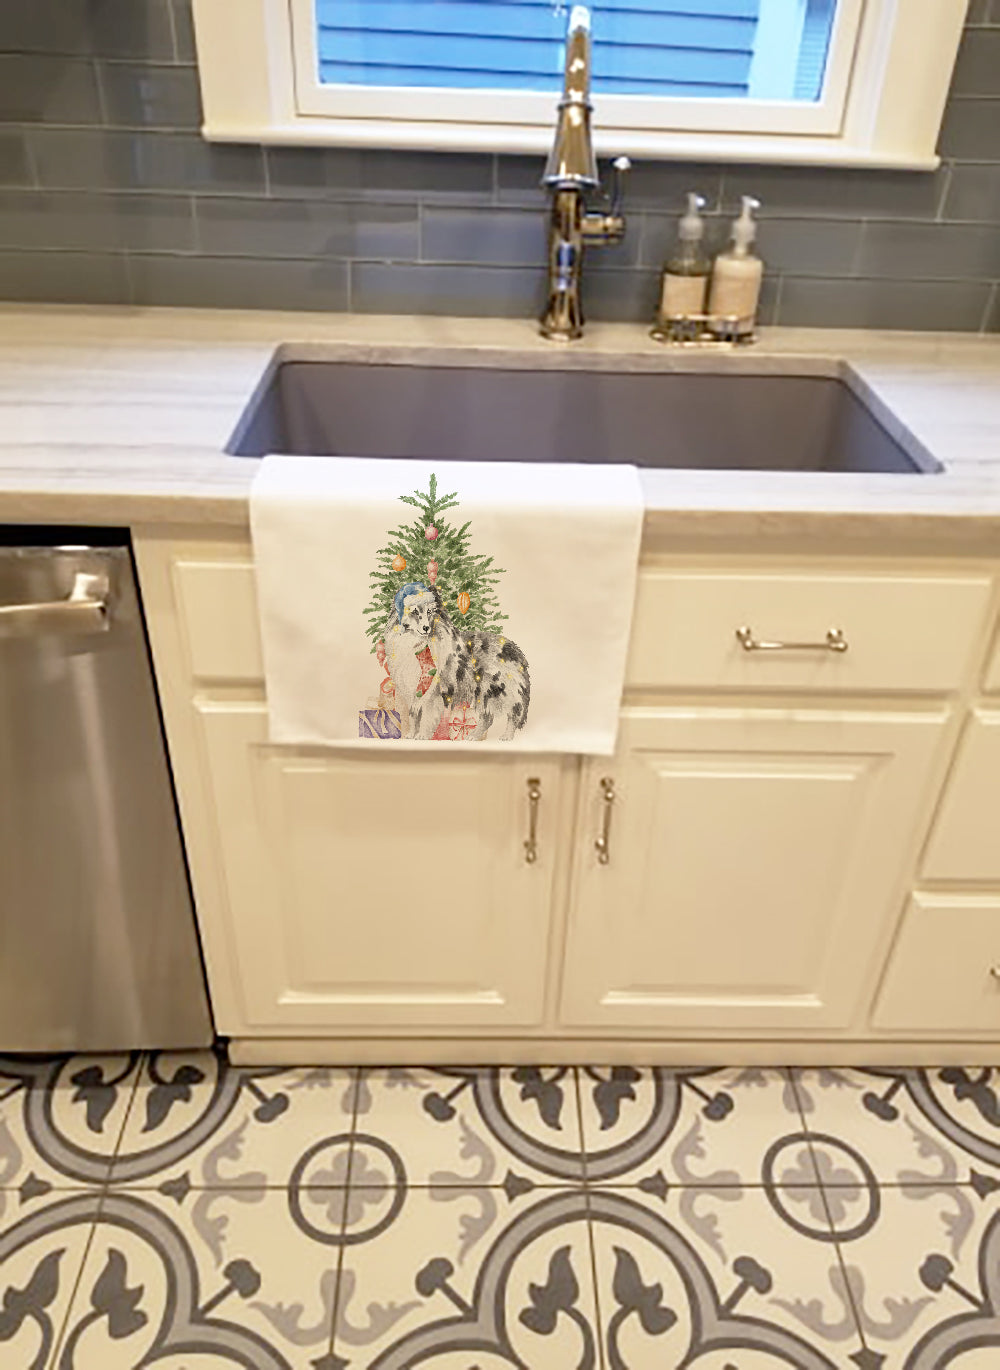 Buy this Sheltie Blue Merle Christmas Presents and Tree White Kitchen Towel Set of 2